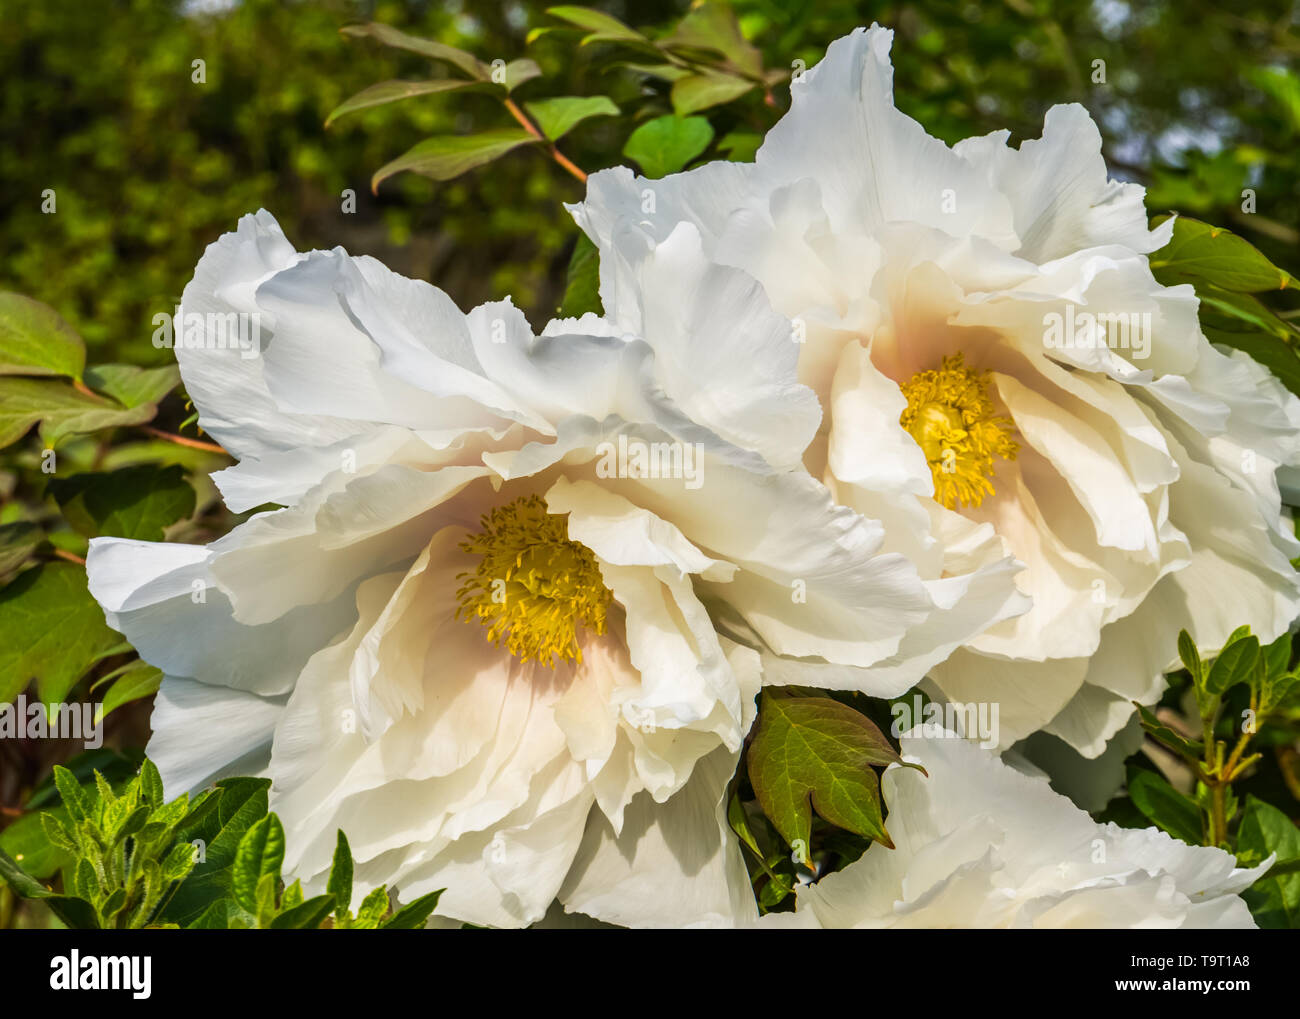 california tree poppy flowers in closeup, big white flowers in bloom during spring season, nature background Stock Photo